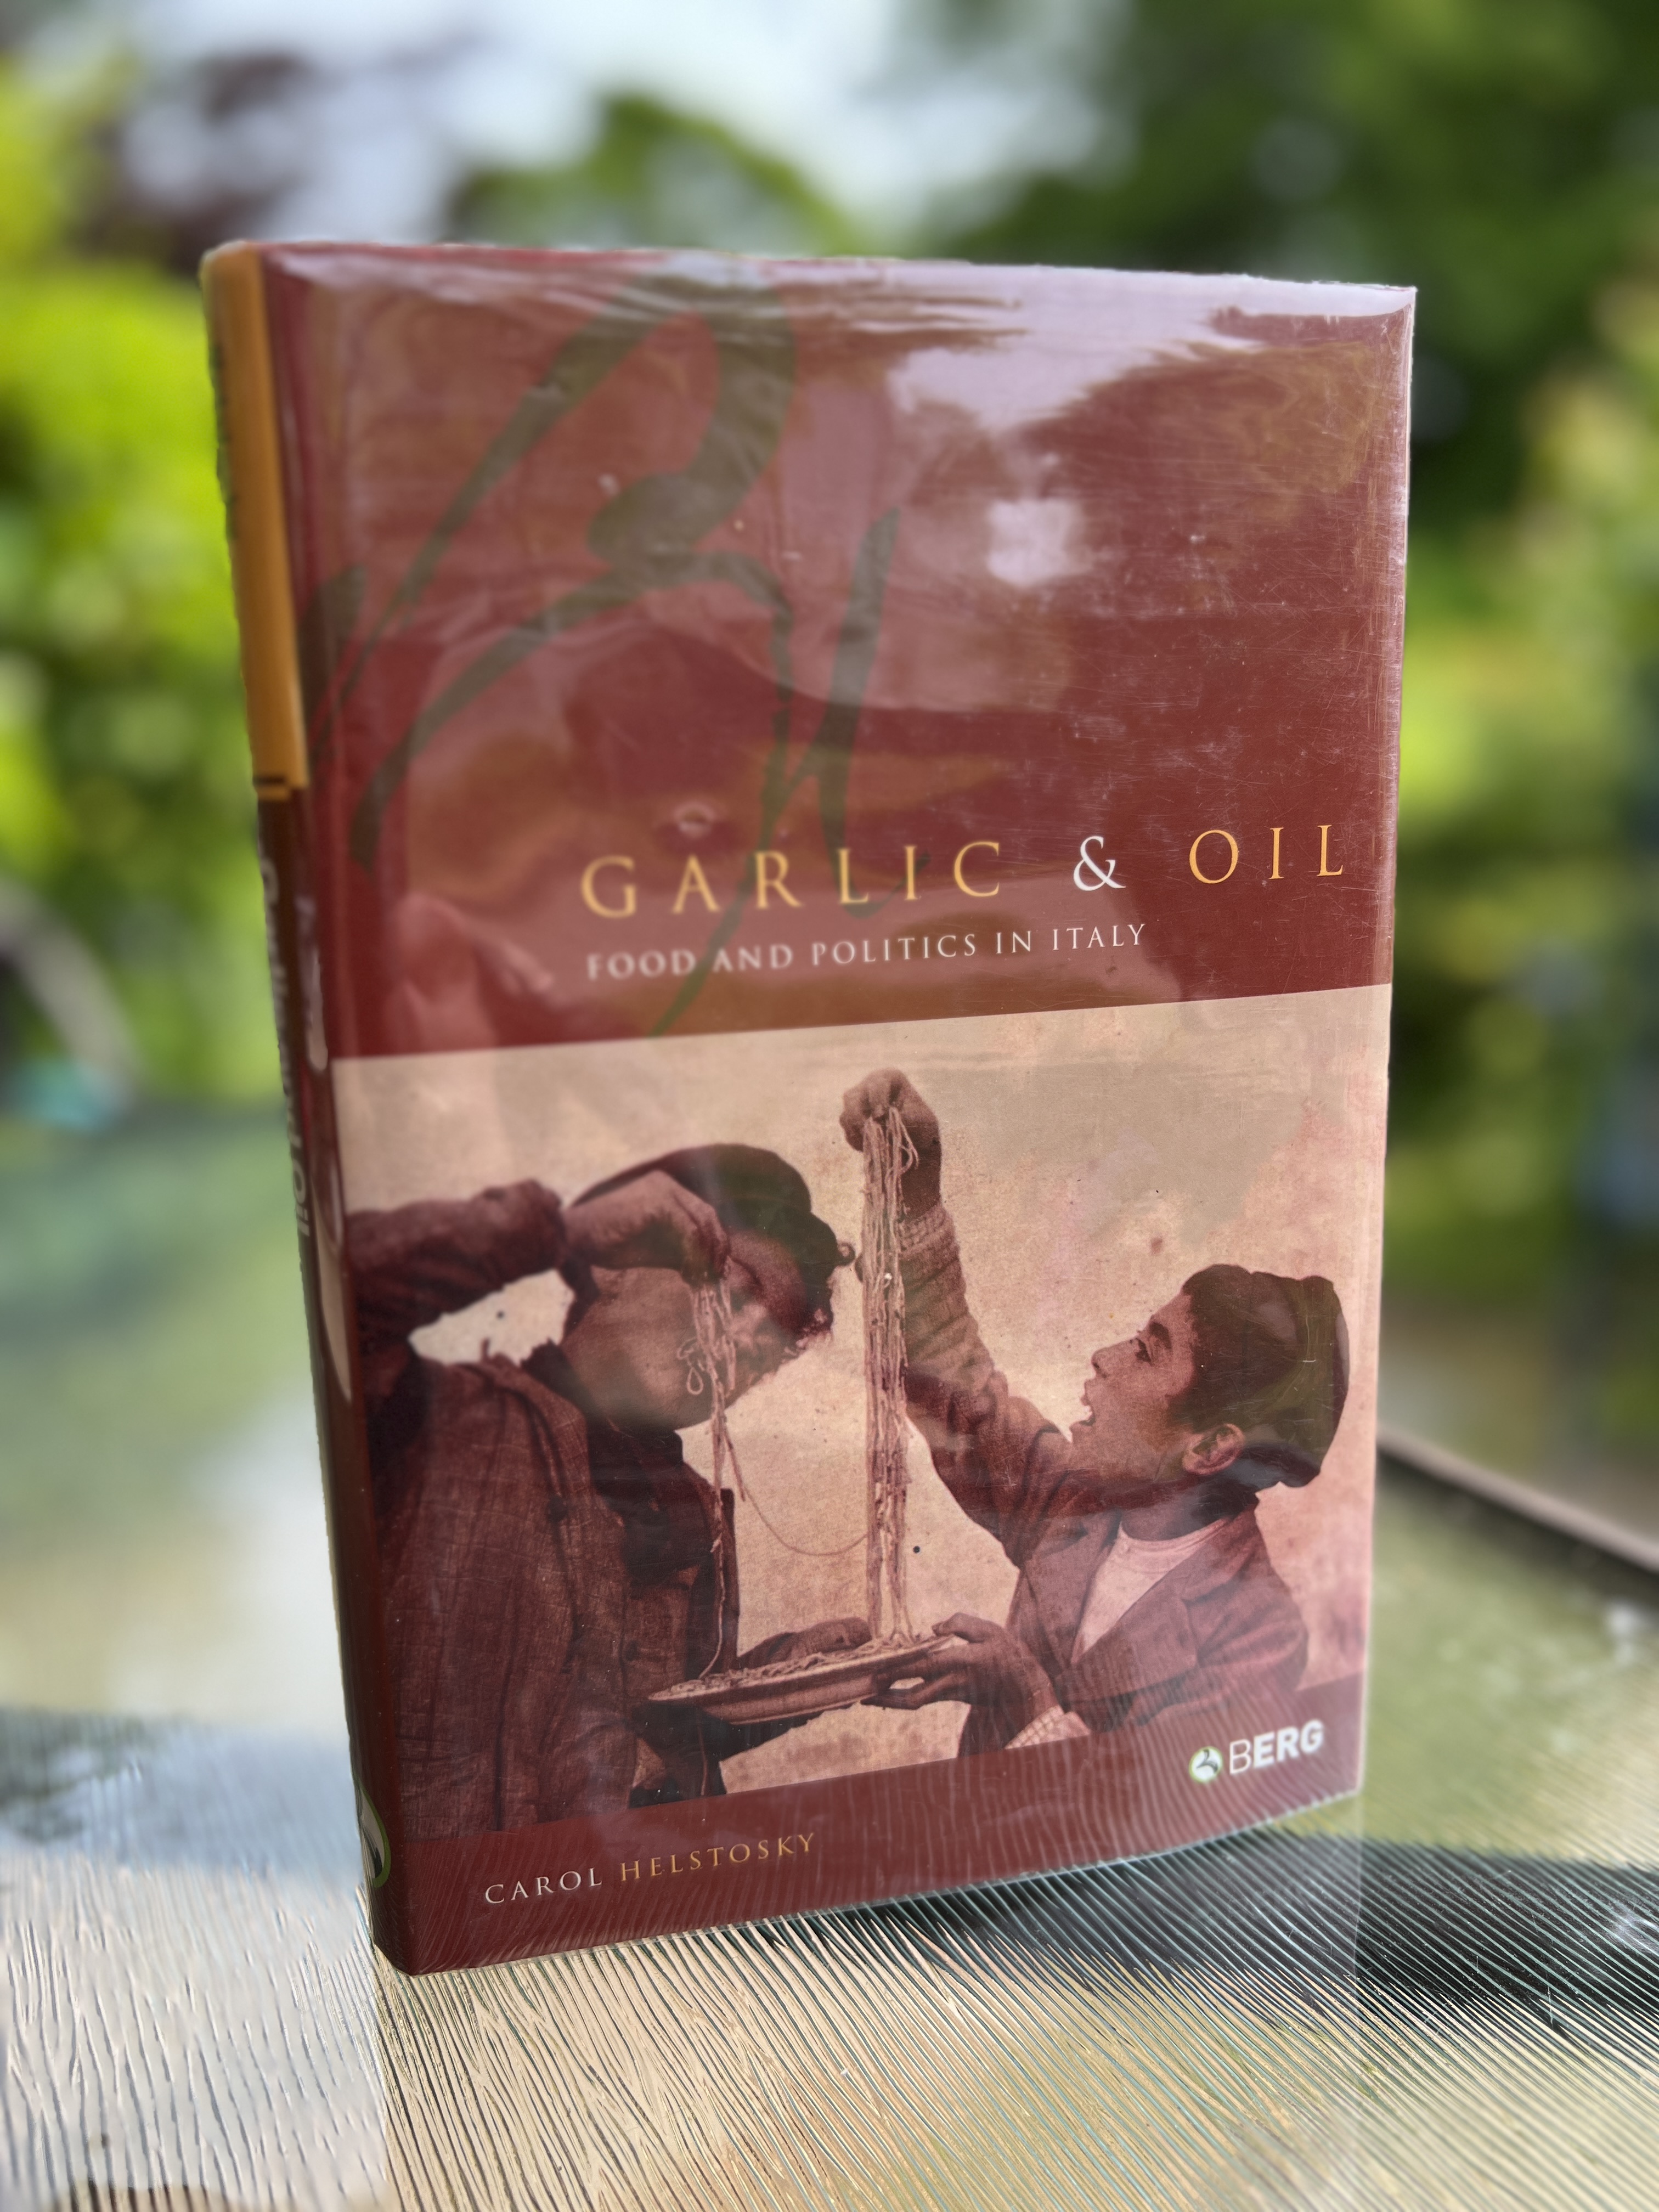 Image for "Garlic and Oil, Food and Politics in Italy"